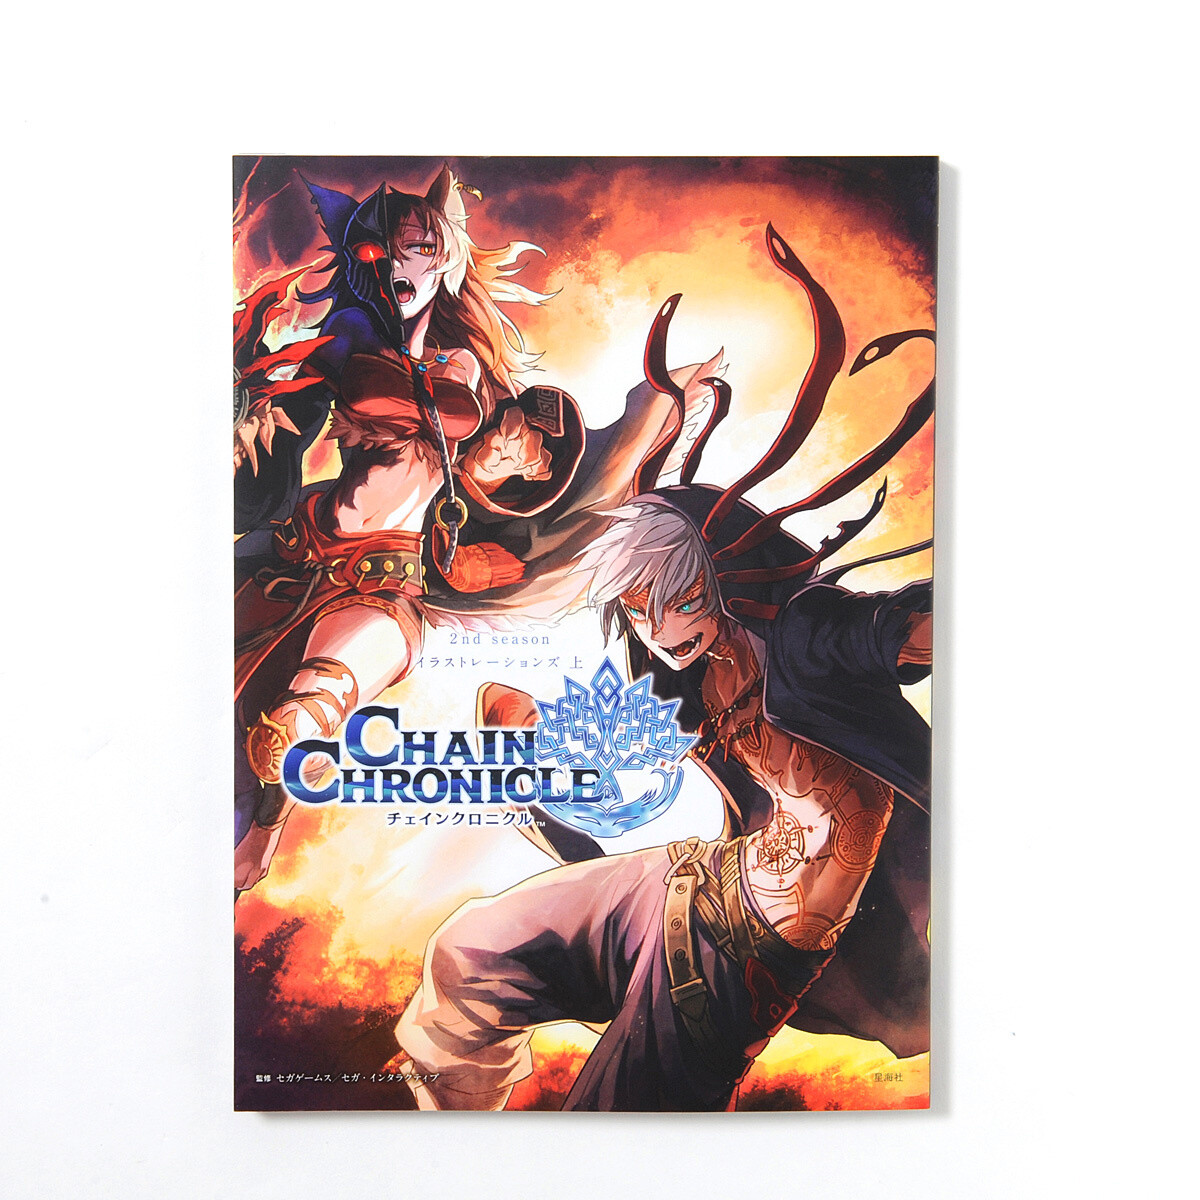 chain chronicle open your chronicle